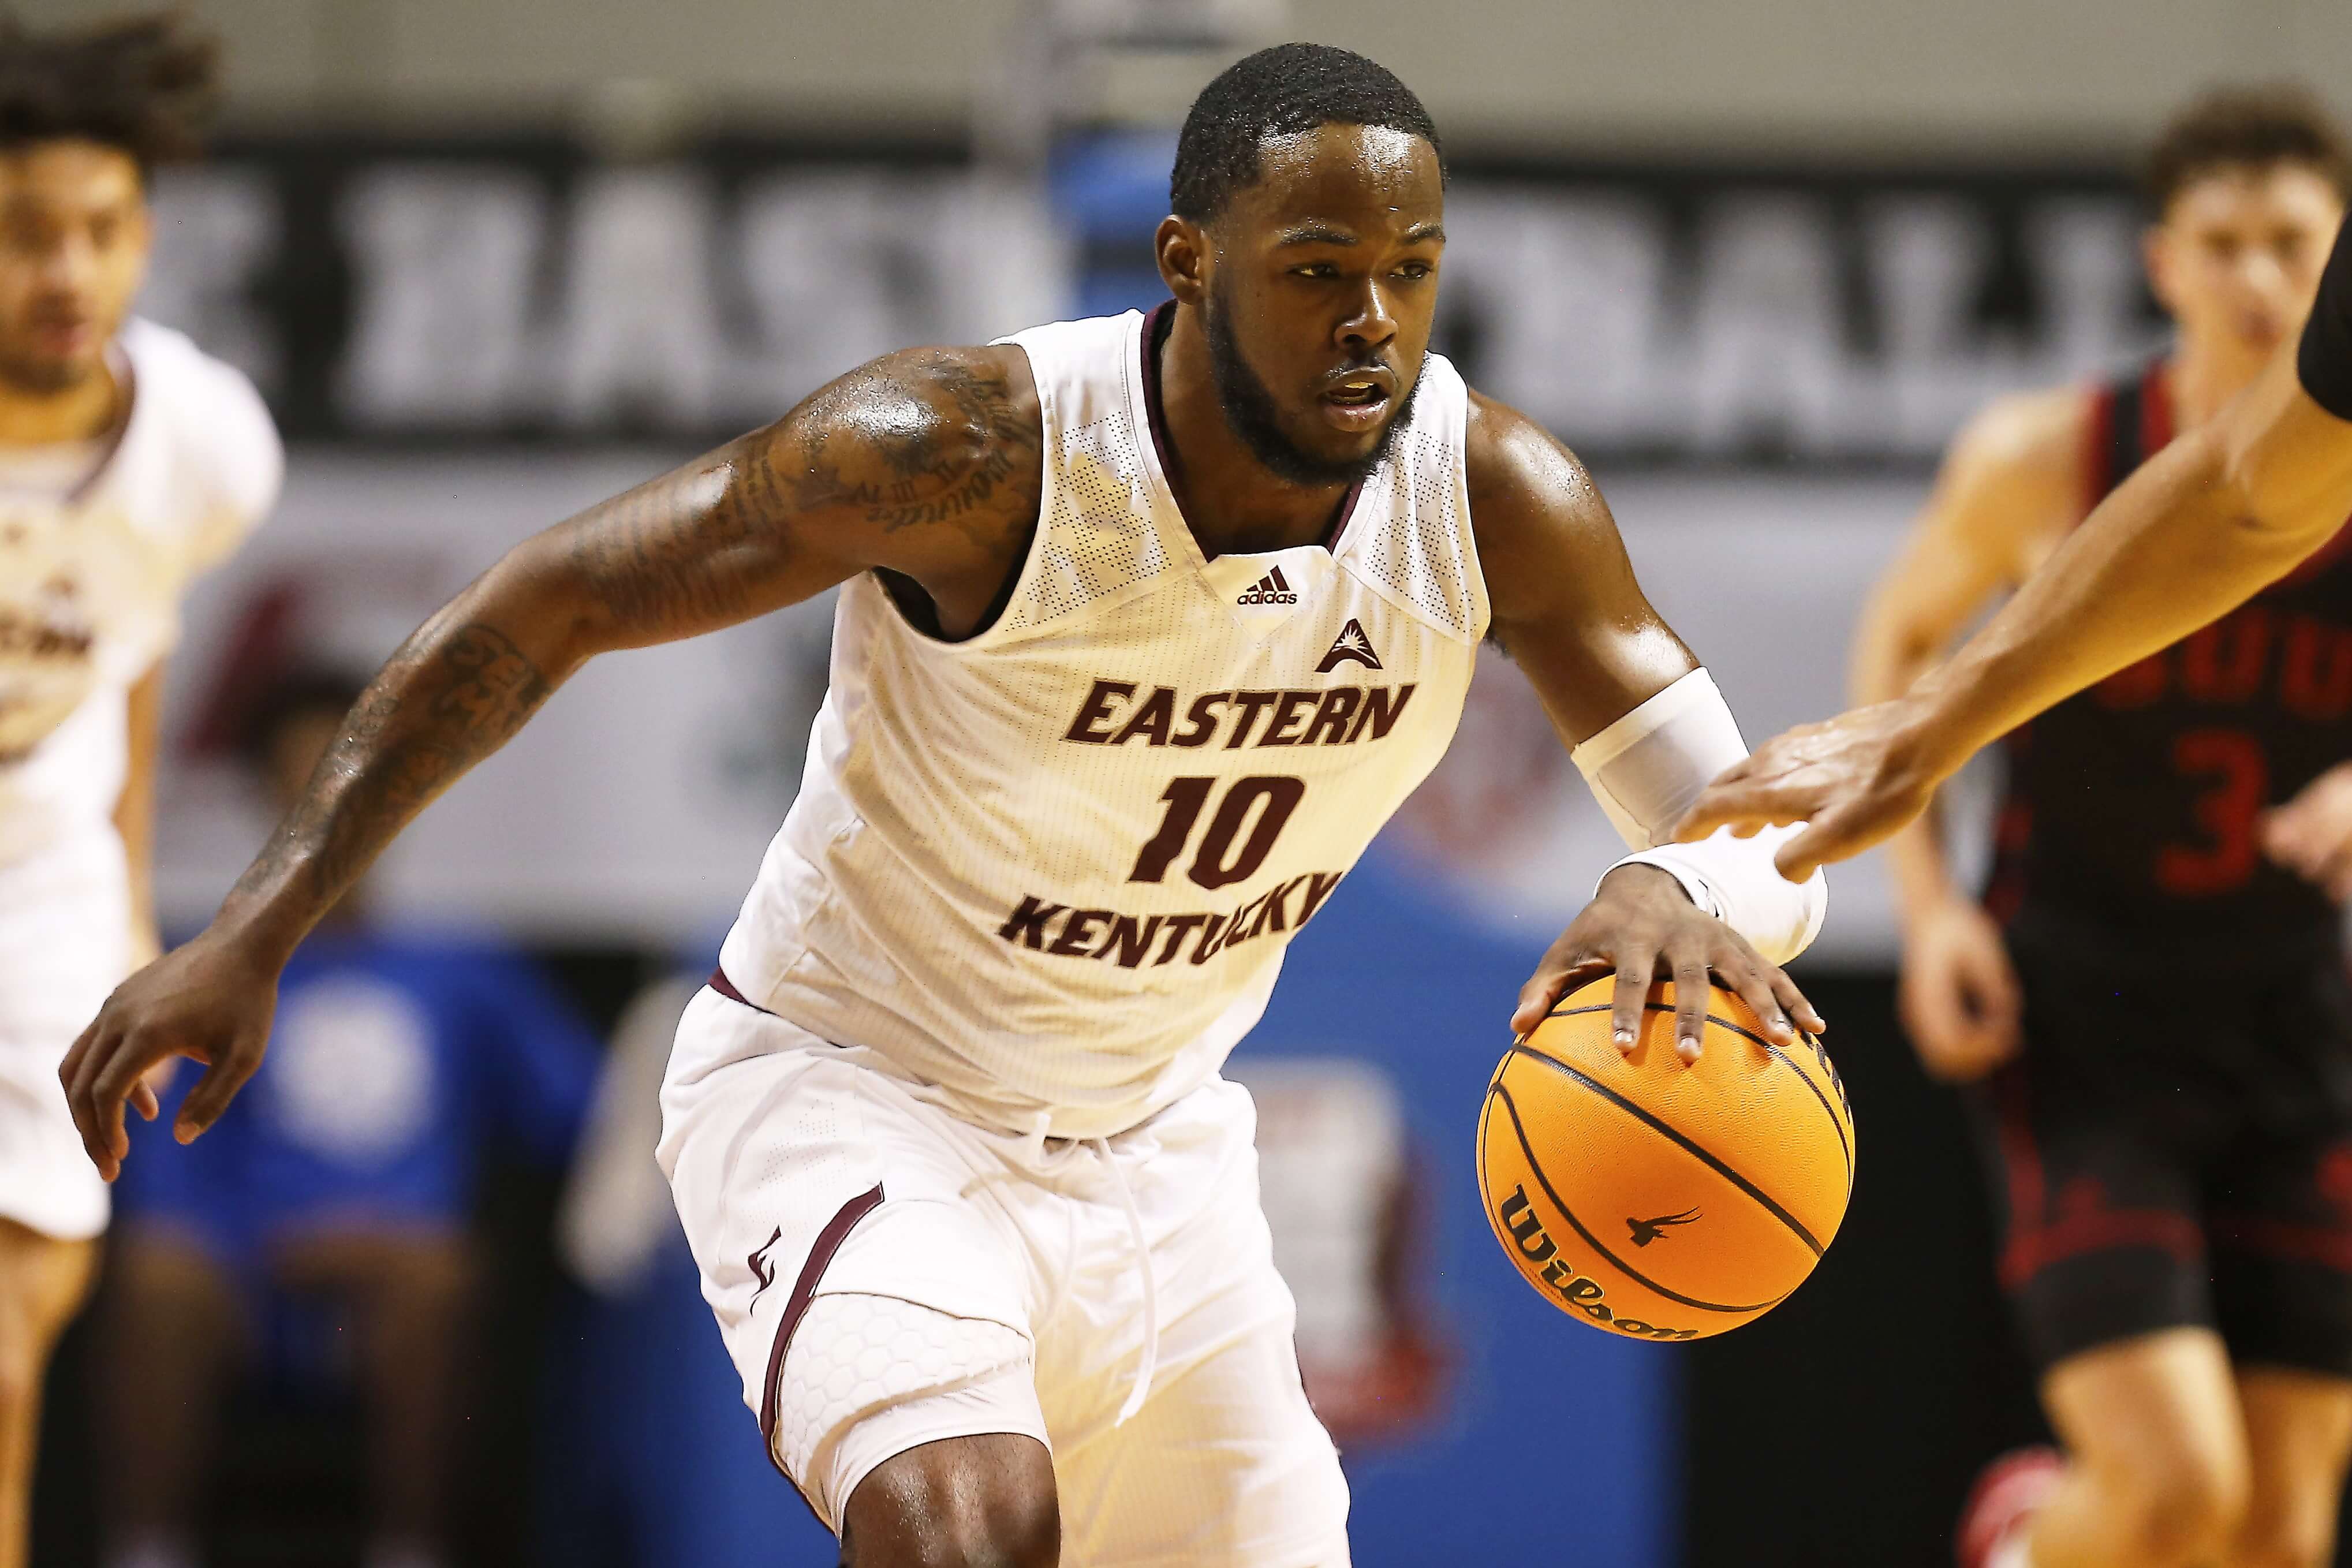 Charlotte vs Eastern Kentucky CBI Championship Predictions, Odds, and Picks: Colonels Help CBI Finale Charge Past Low Total